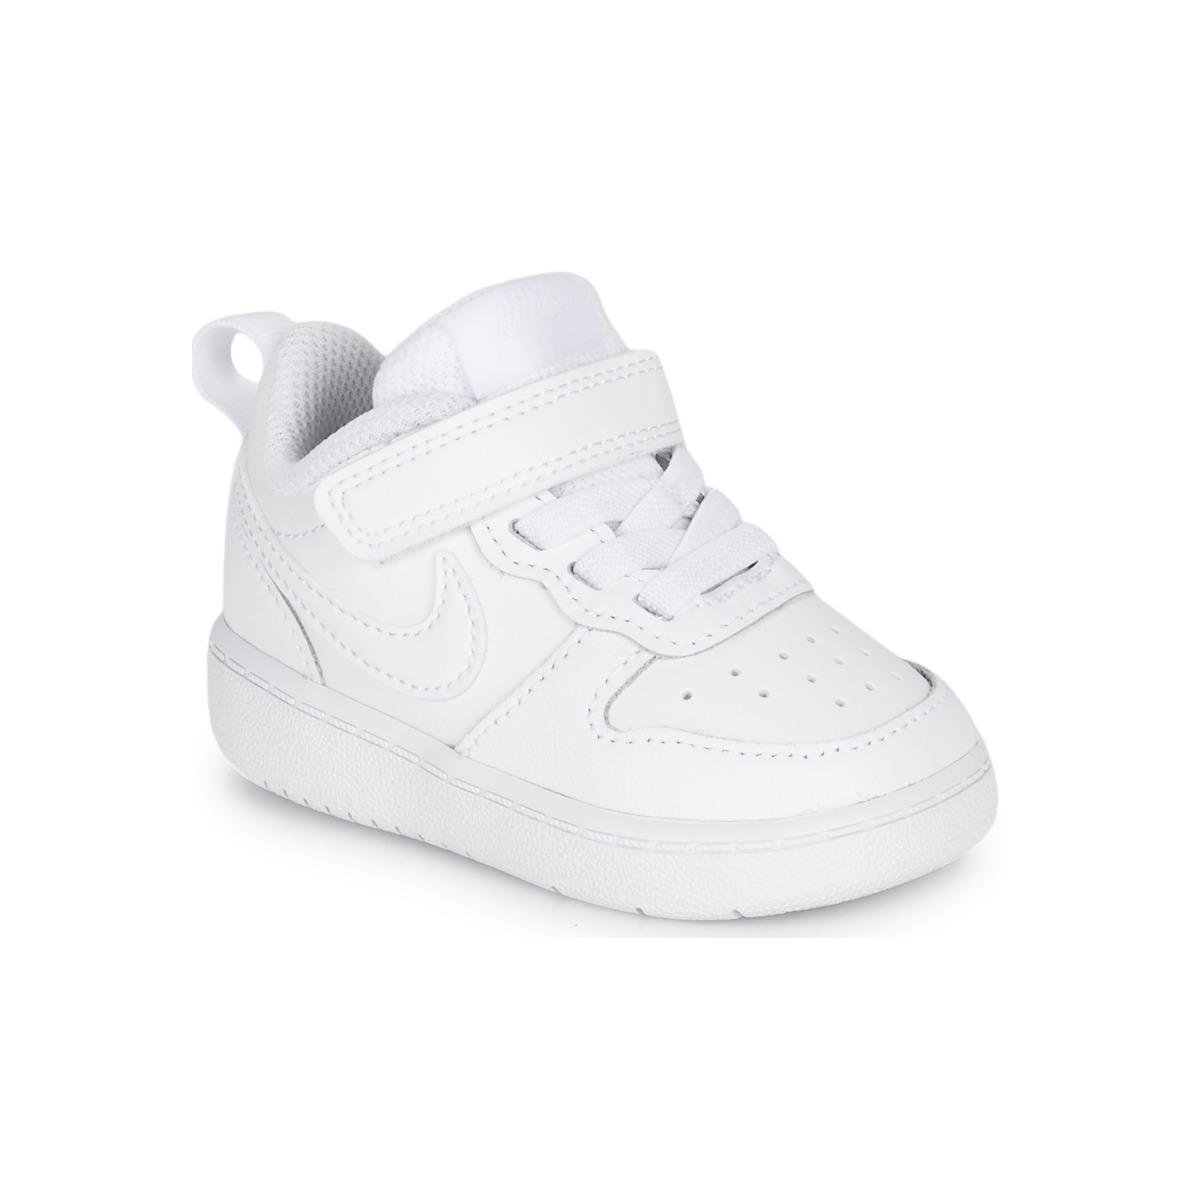 Xαμηλά Sneakers Nike COURT BOROUGH LOW 2 TD